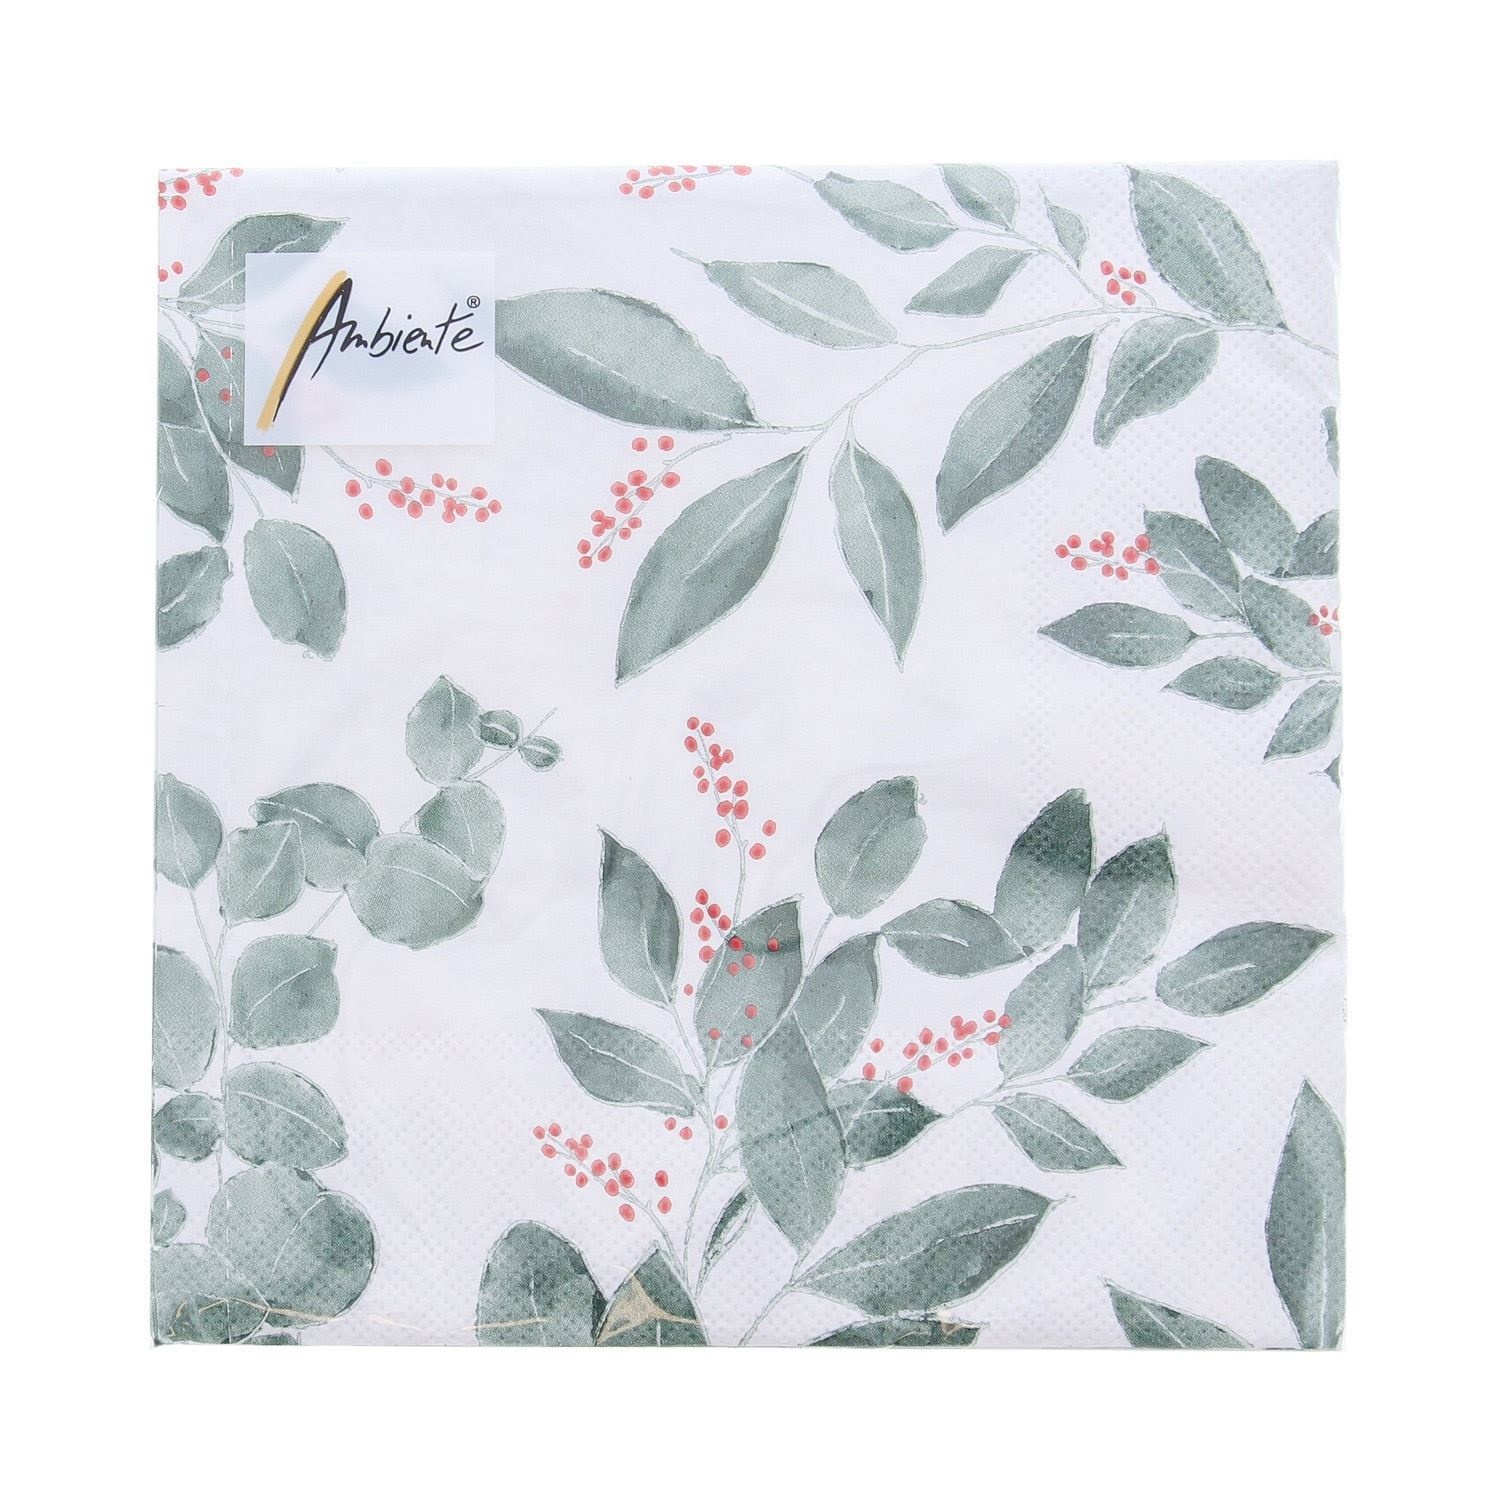 Napkin Leaves and berries 33 cm x 33 cm - 165*165*25 mm - 1 pack of 20 napkins